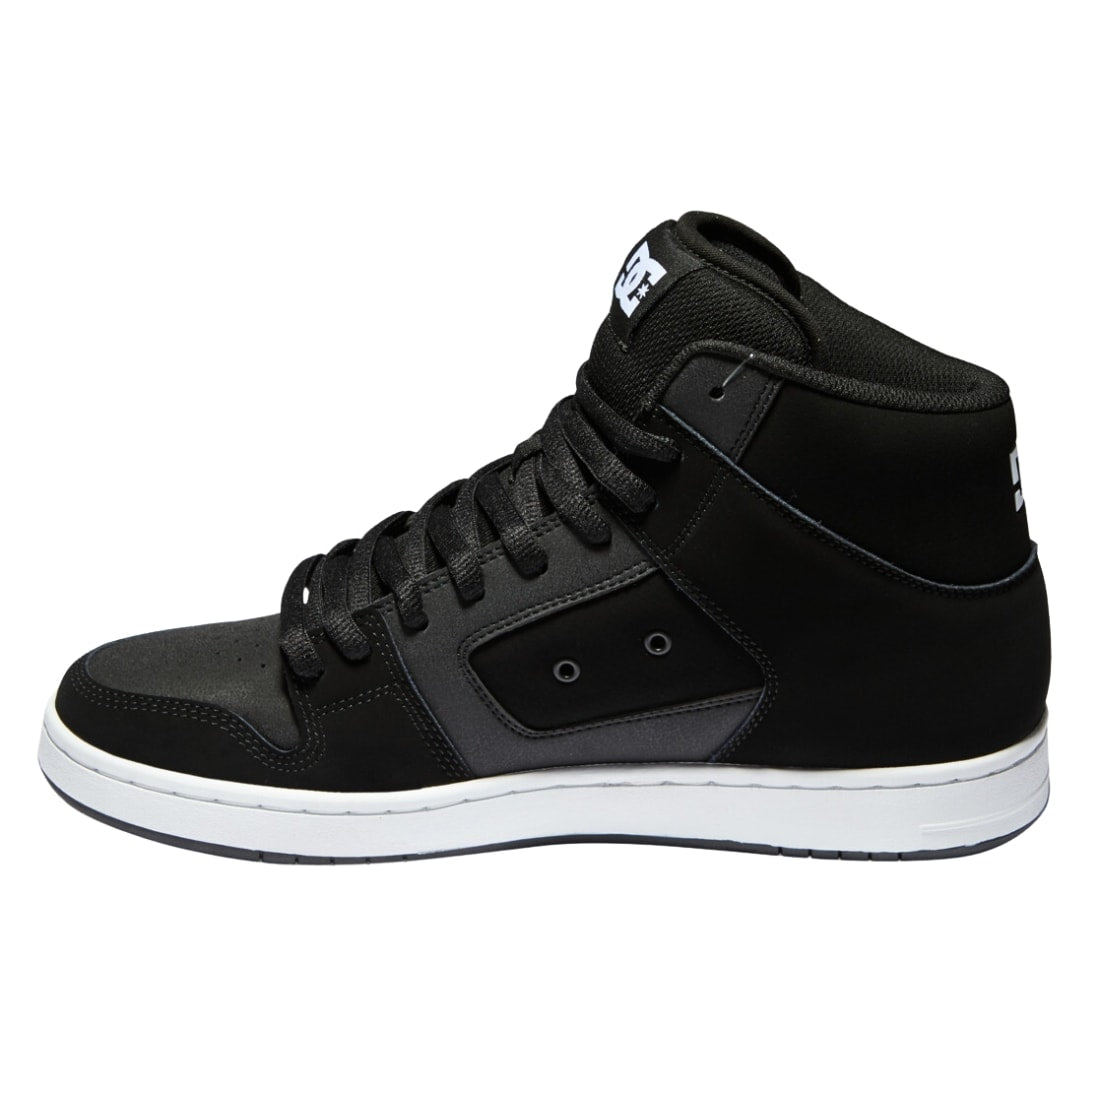 DC Manteca 4 Hi-Top Shoes - Black/White - Mens High Top Trainers by DC